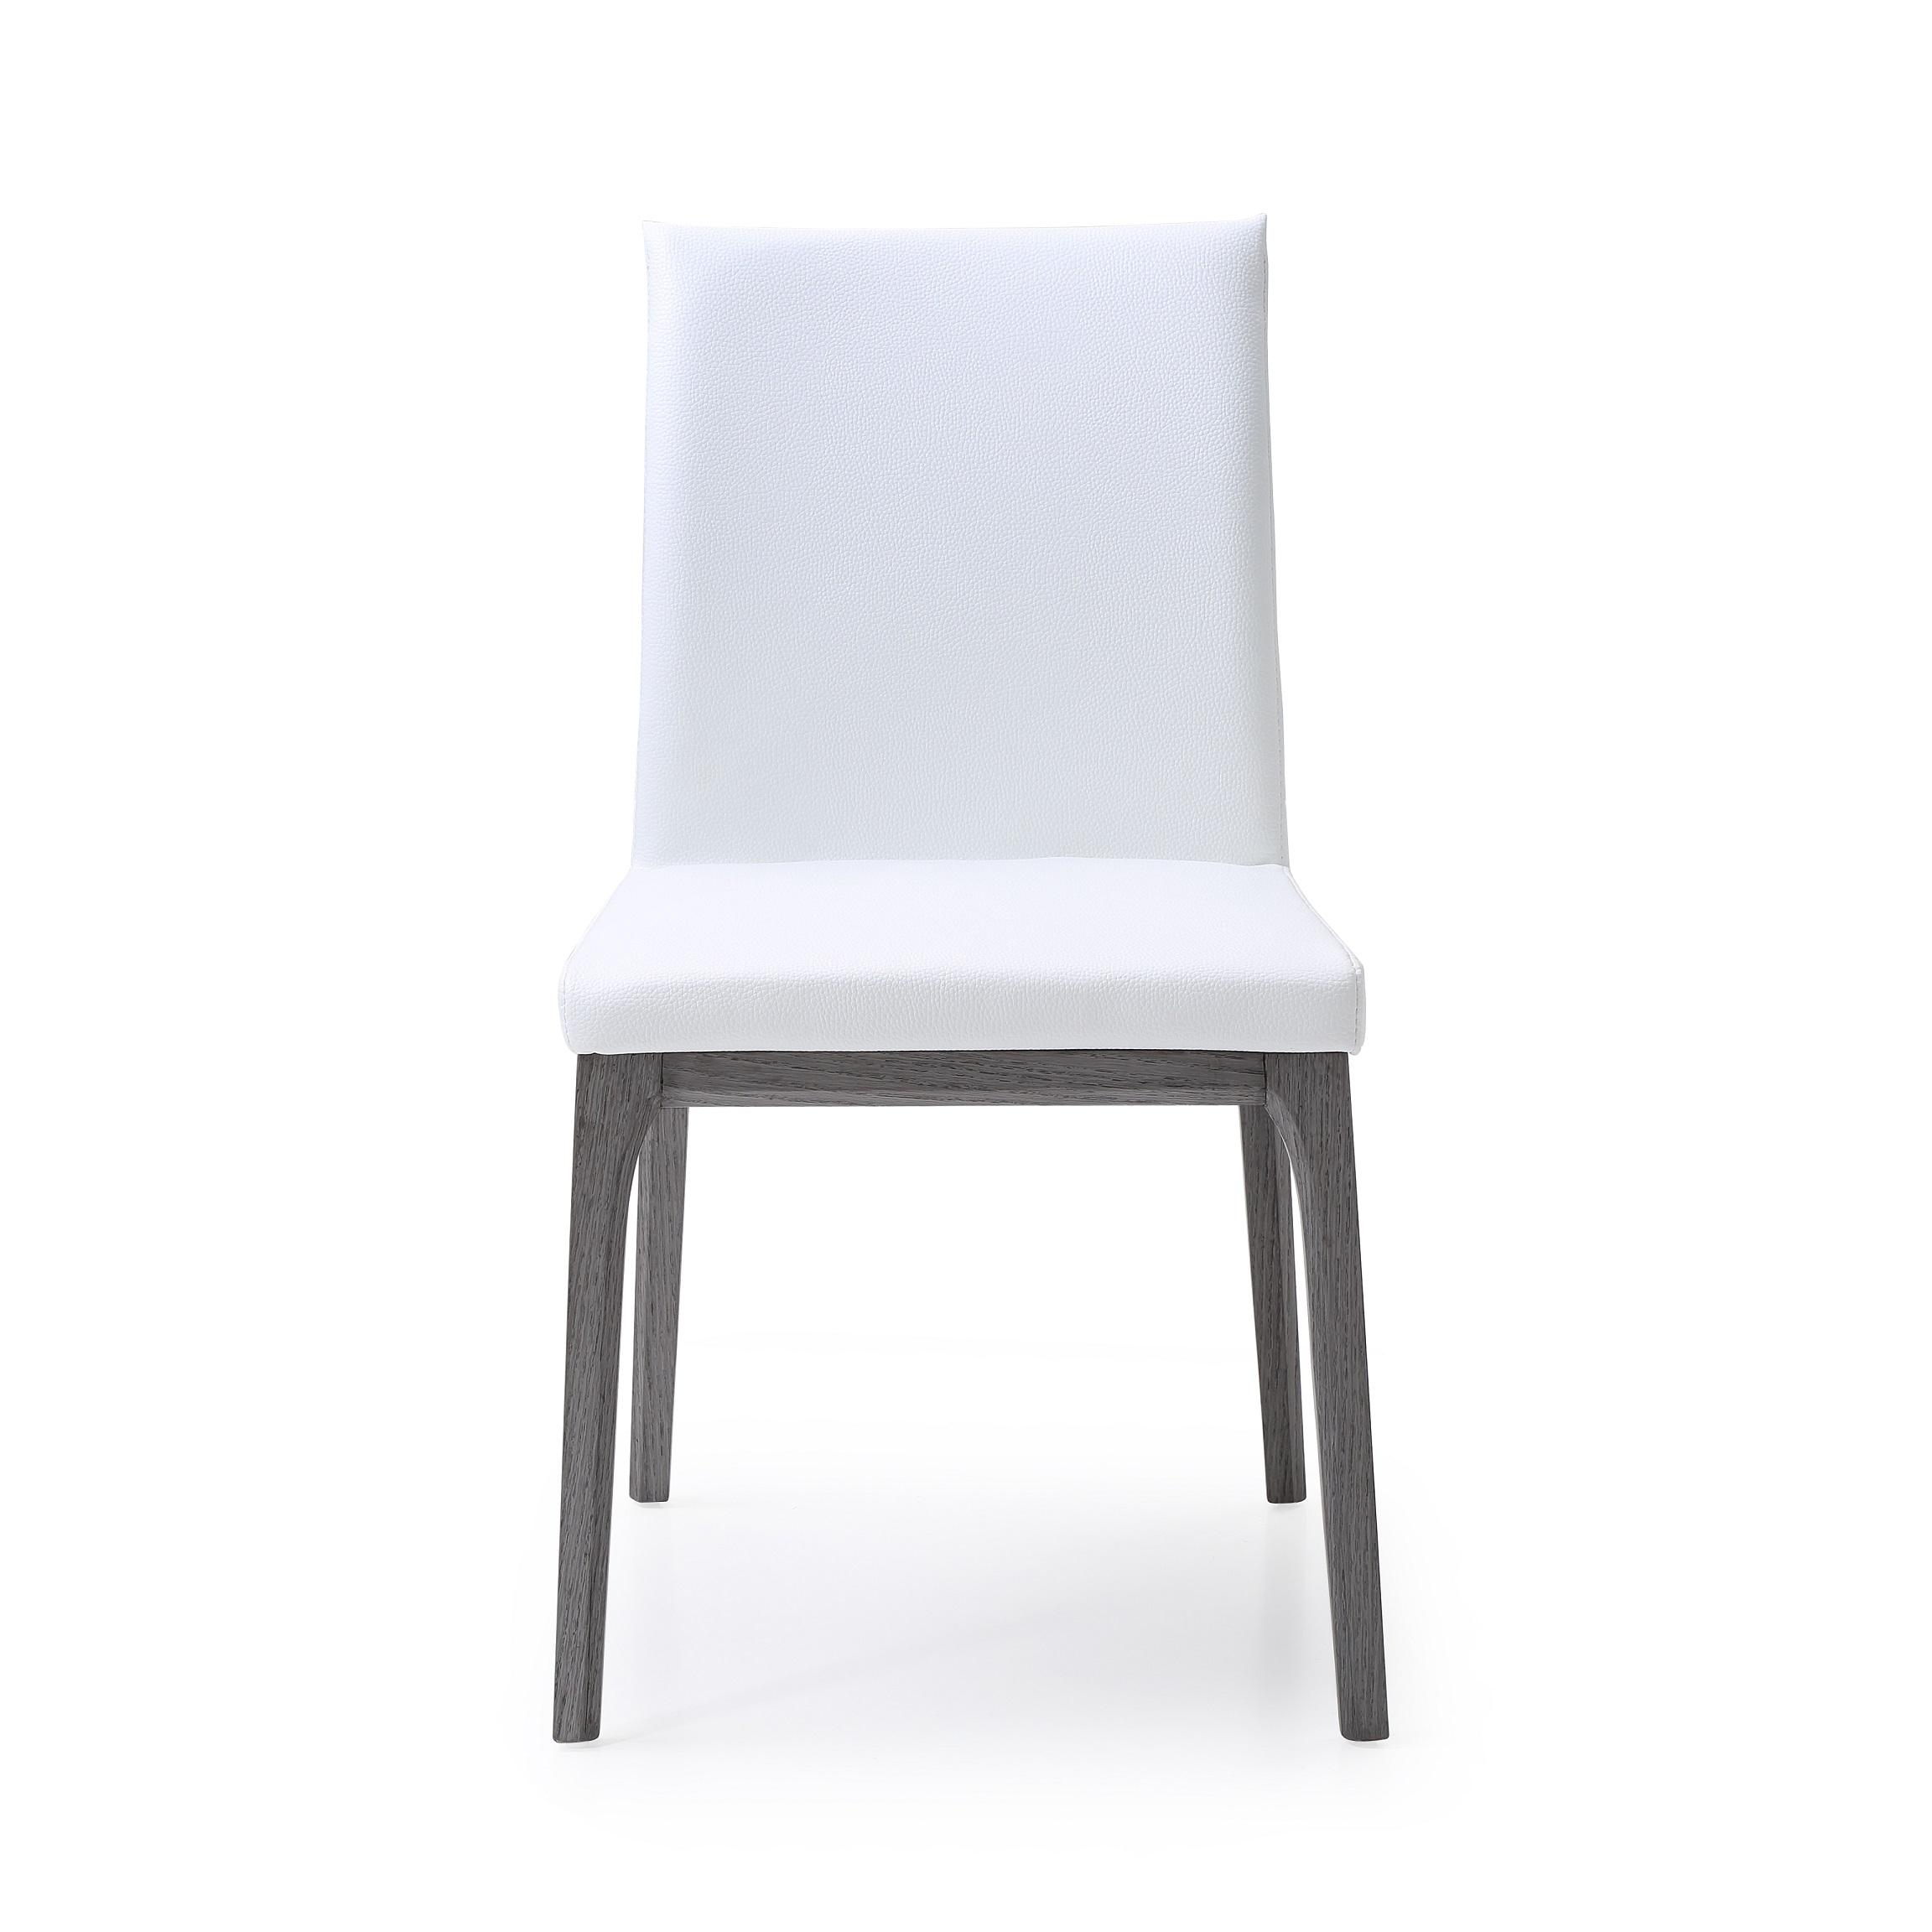 Modern Dining Chair Set DC1454-GRY/WHT Stella DC1454-GRY/WHT in Oak, White Faux Leather